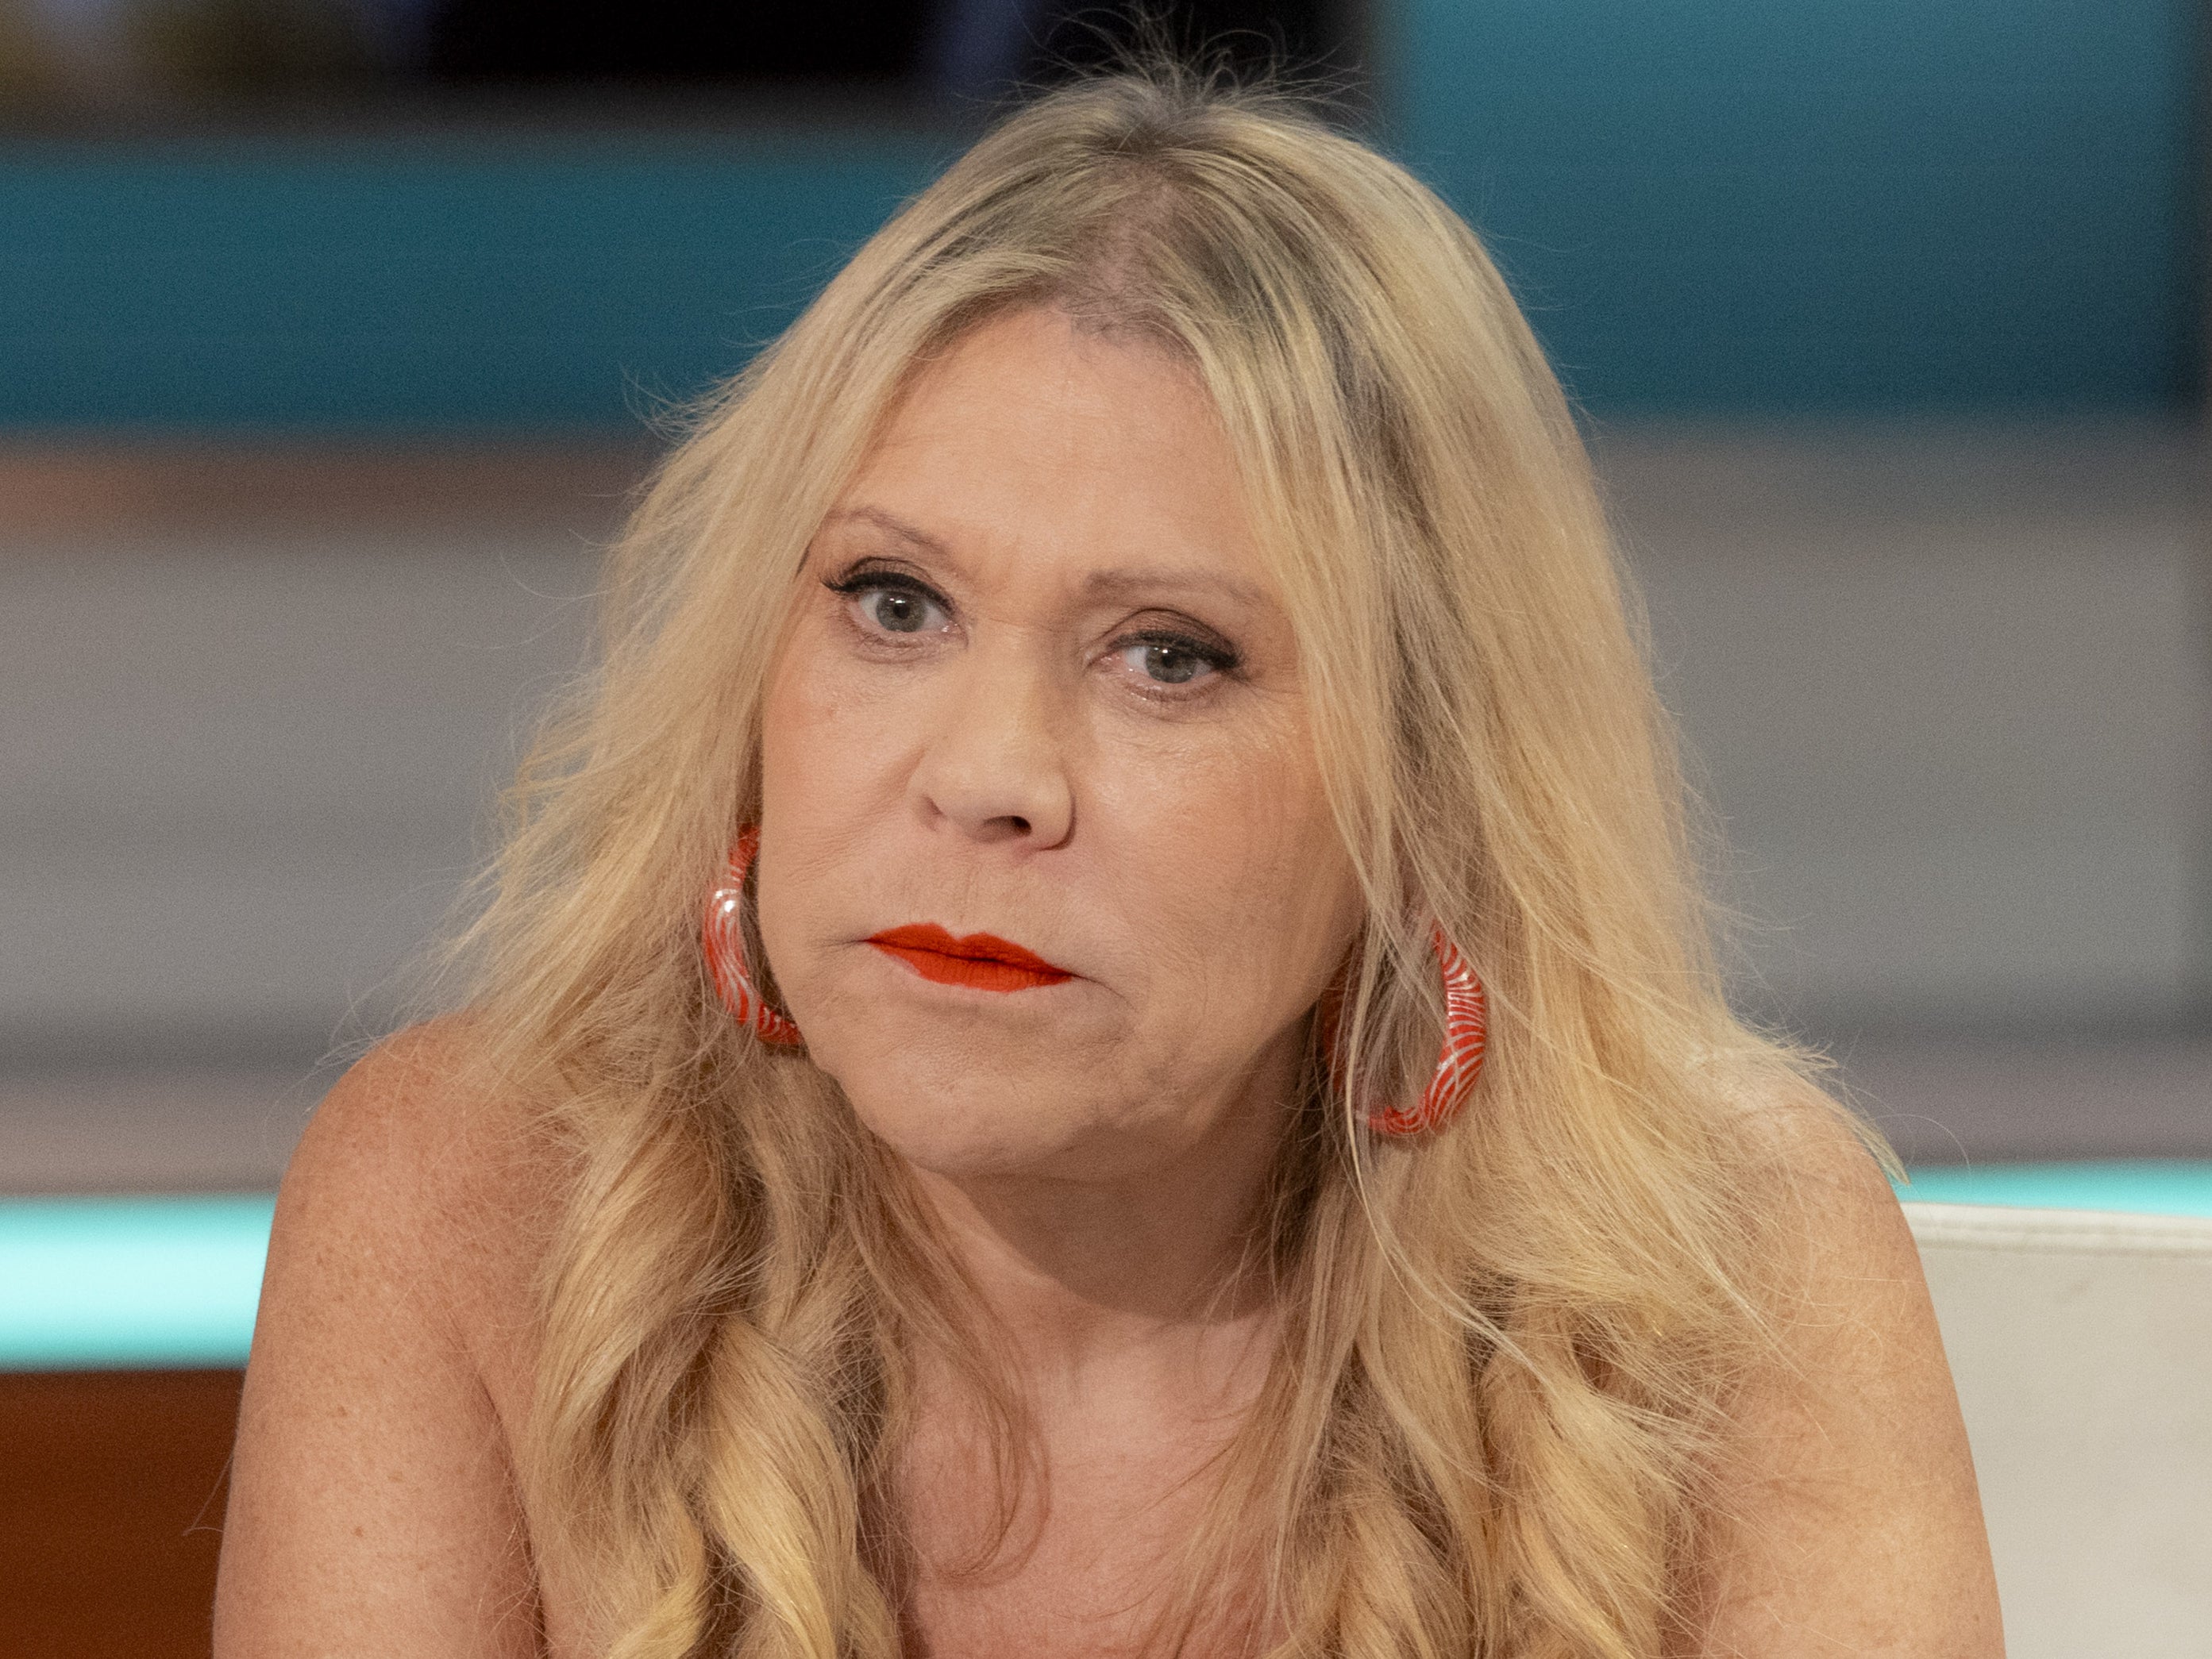 tina malone says she’s ‘broken’ after death of husband